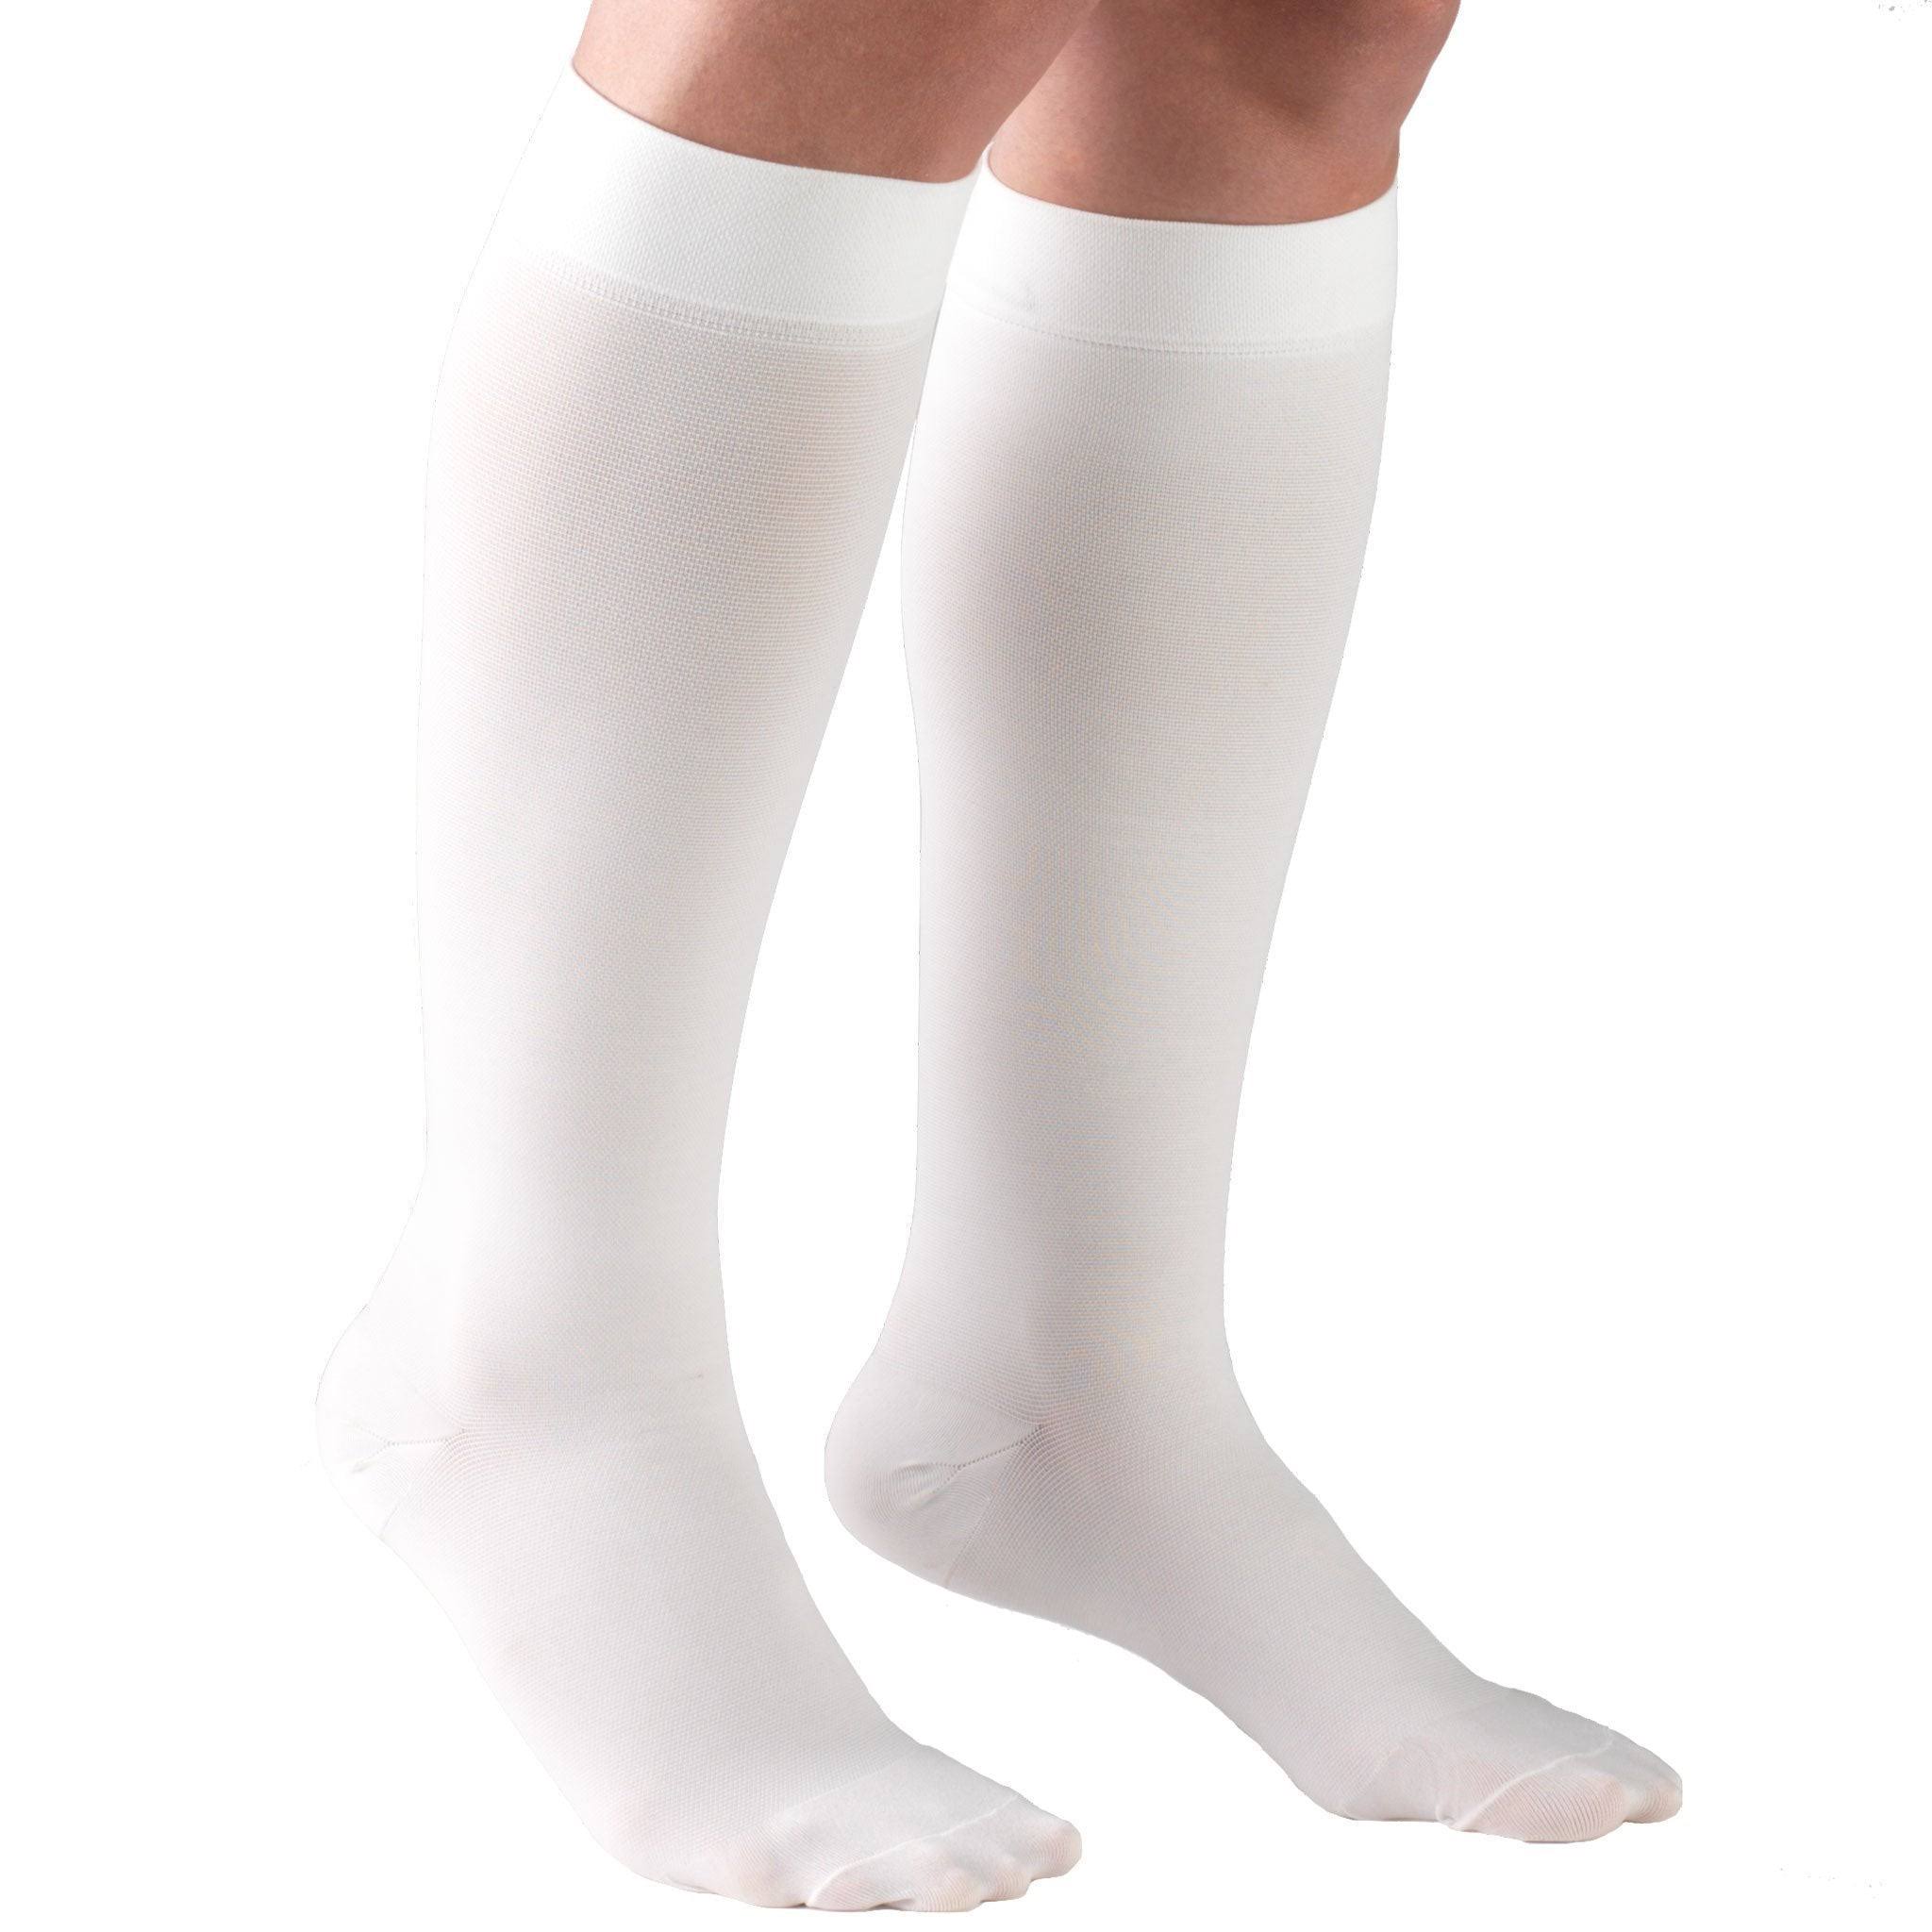 Truform Closed Toe Knee High Compression Stockings - Beige, Large, One Pair